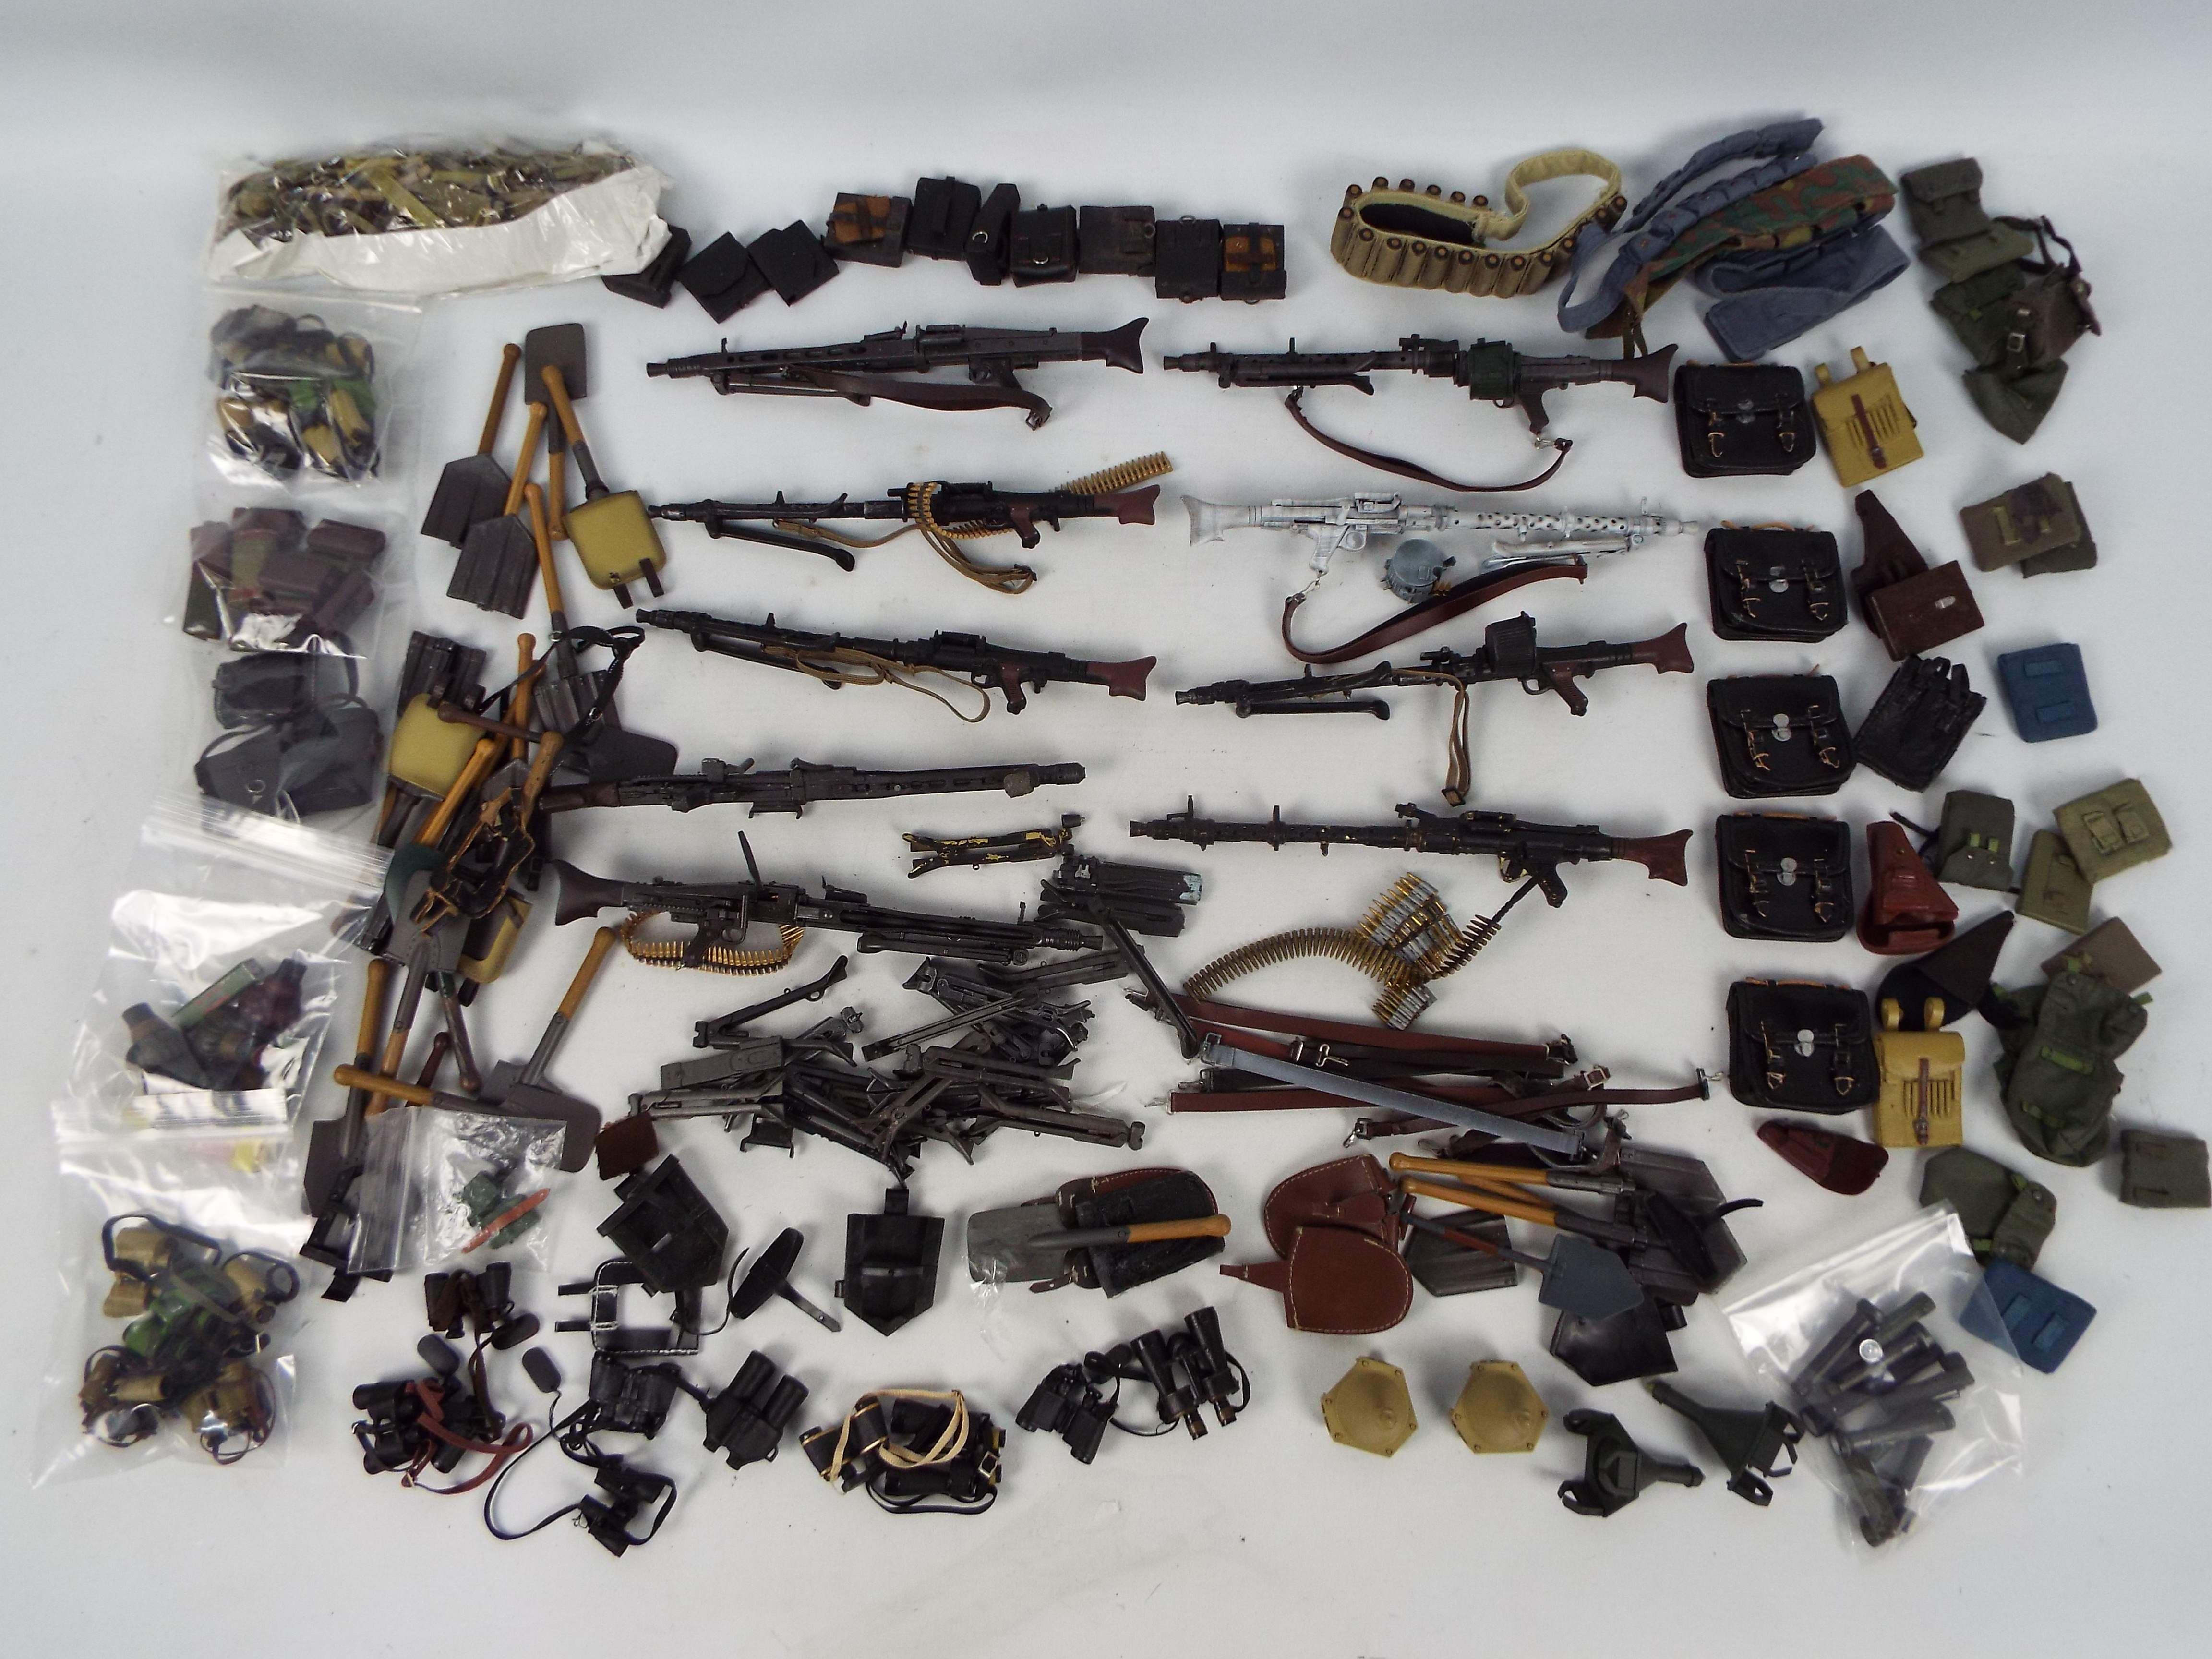 Dragon - DiD - A loose group of 1:6 scale action figure weapons and accessories,